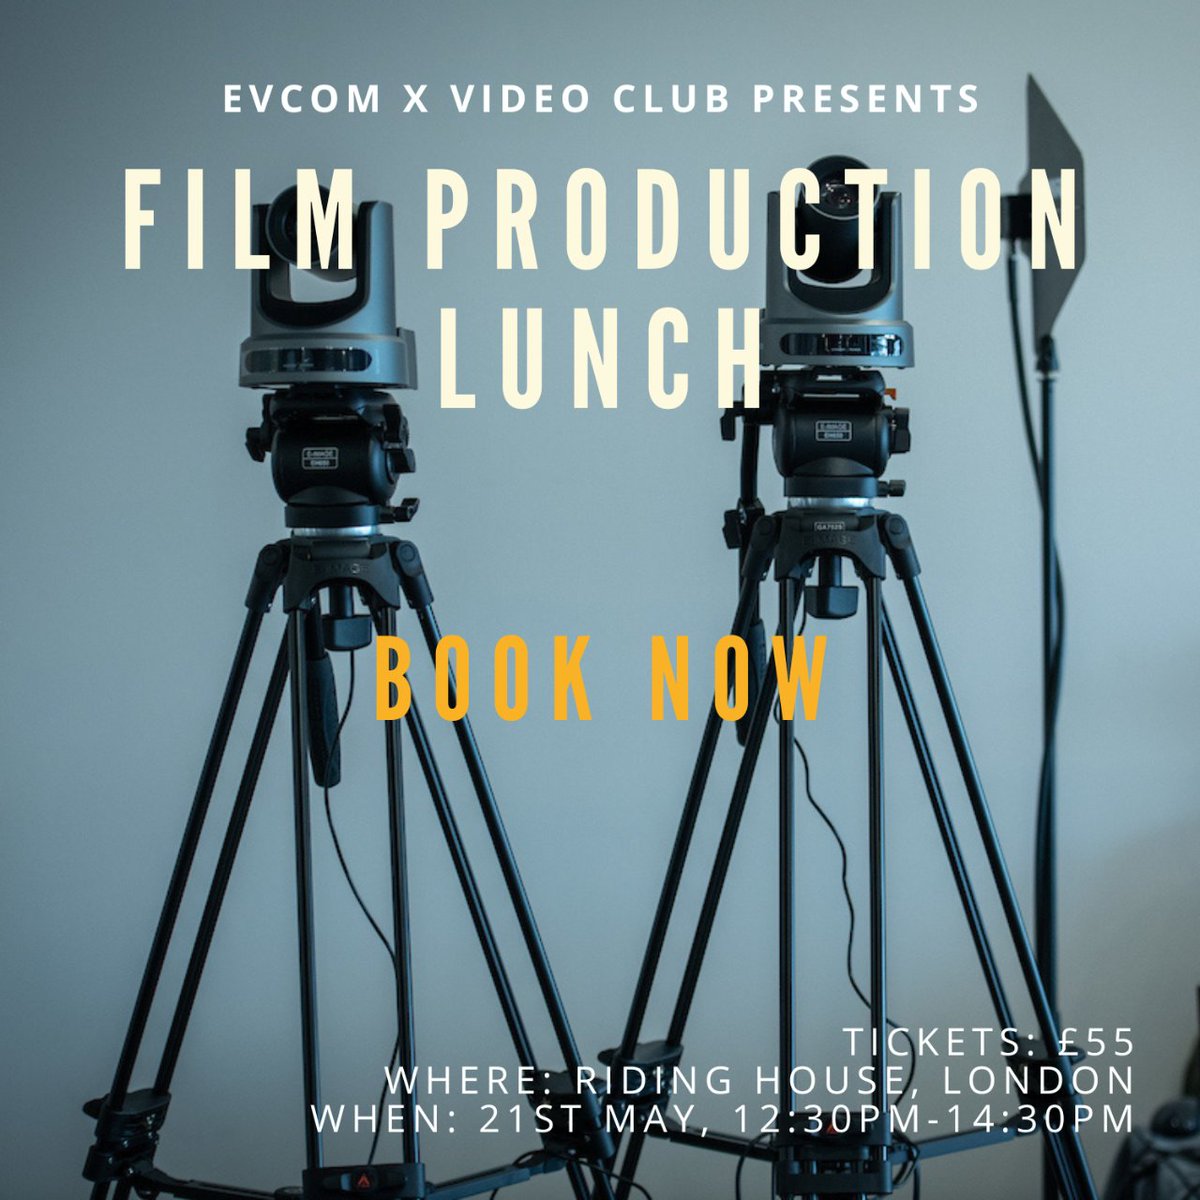 On the 21st May we are bringing back the EVCOM Film Lunches, a chance for filmmakers to come together, discuss what's going well and key sector issues, and forecast the next 12-18 months over a three-course lunch!  Book now: cvent.me/3KgABK #film #brandfilm